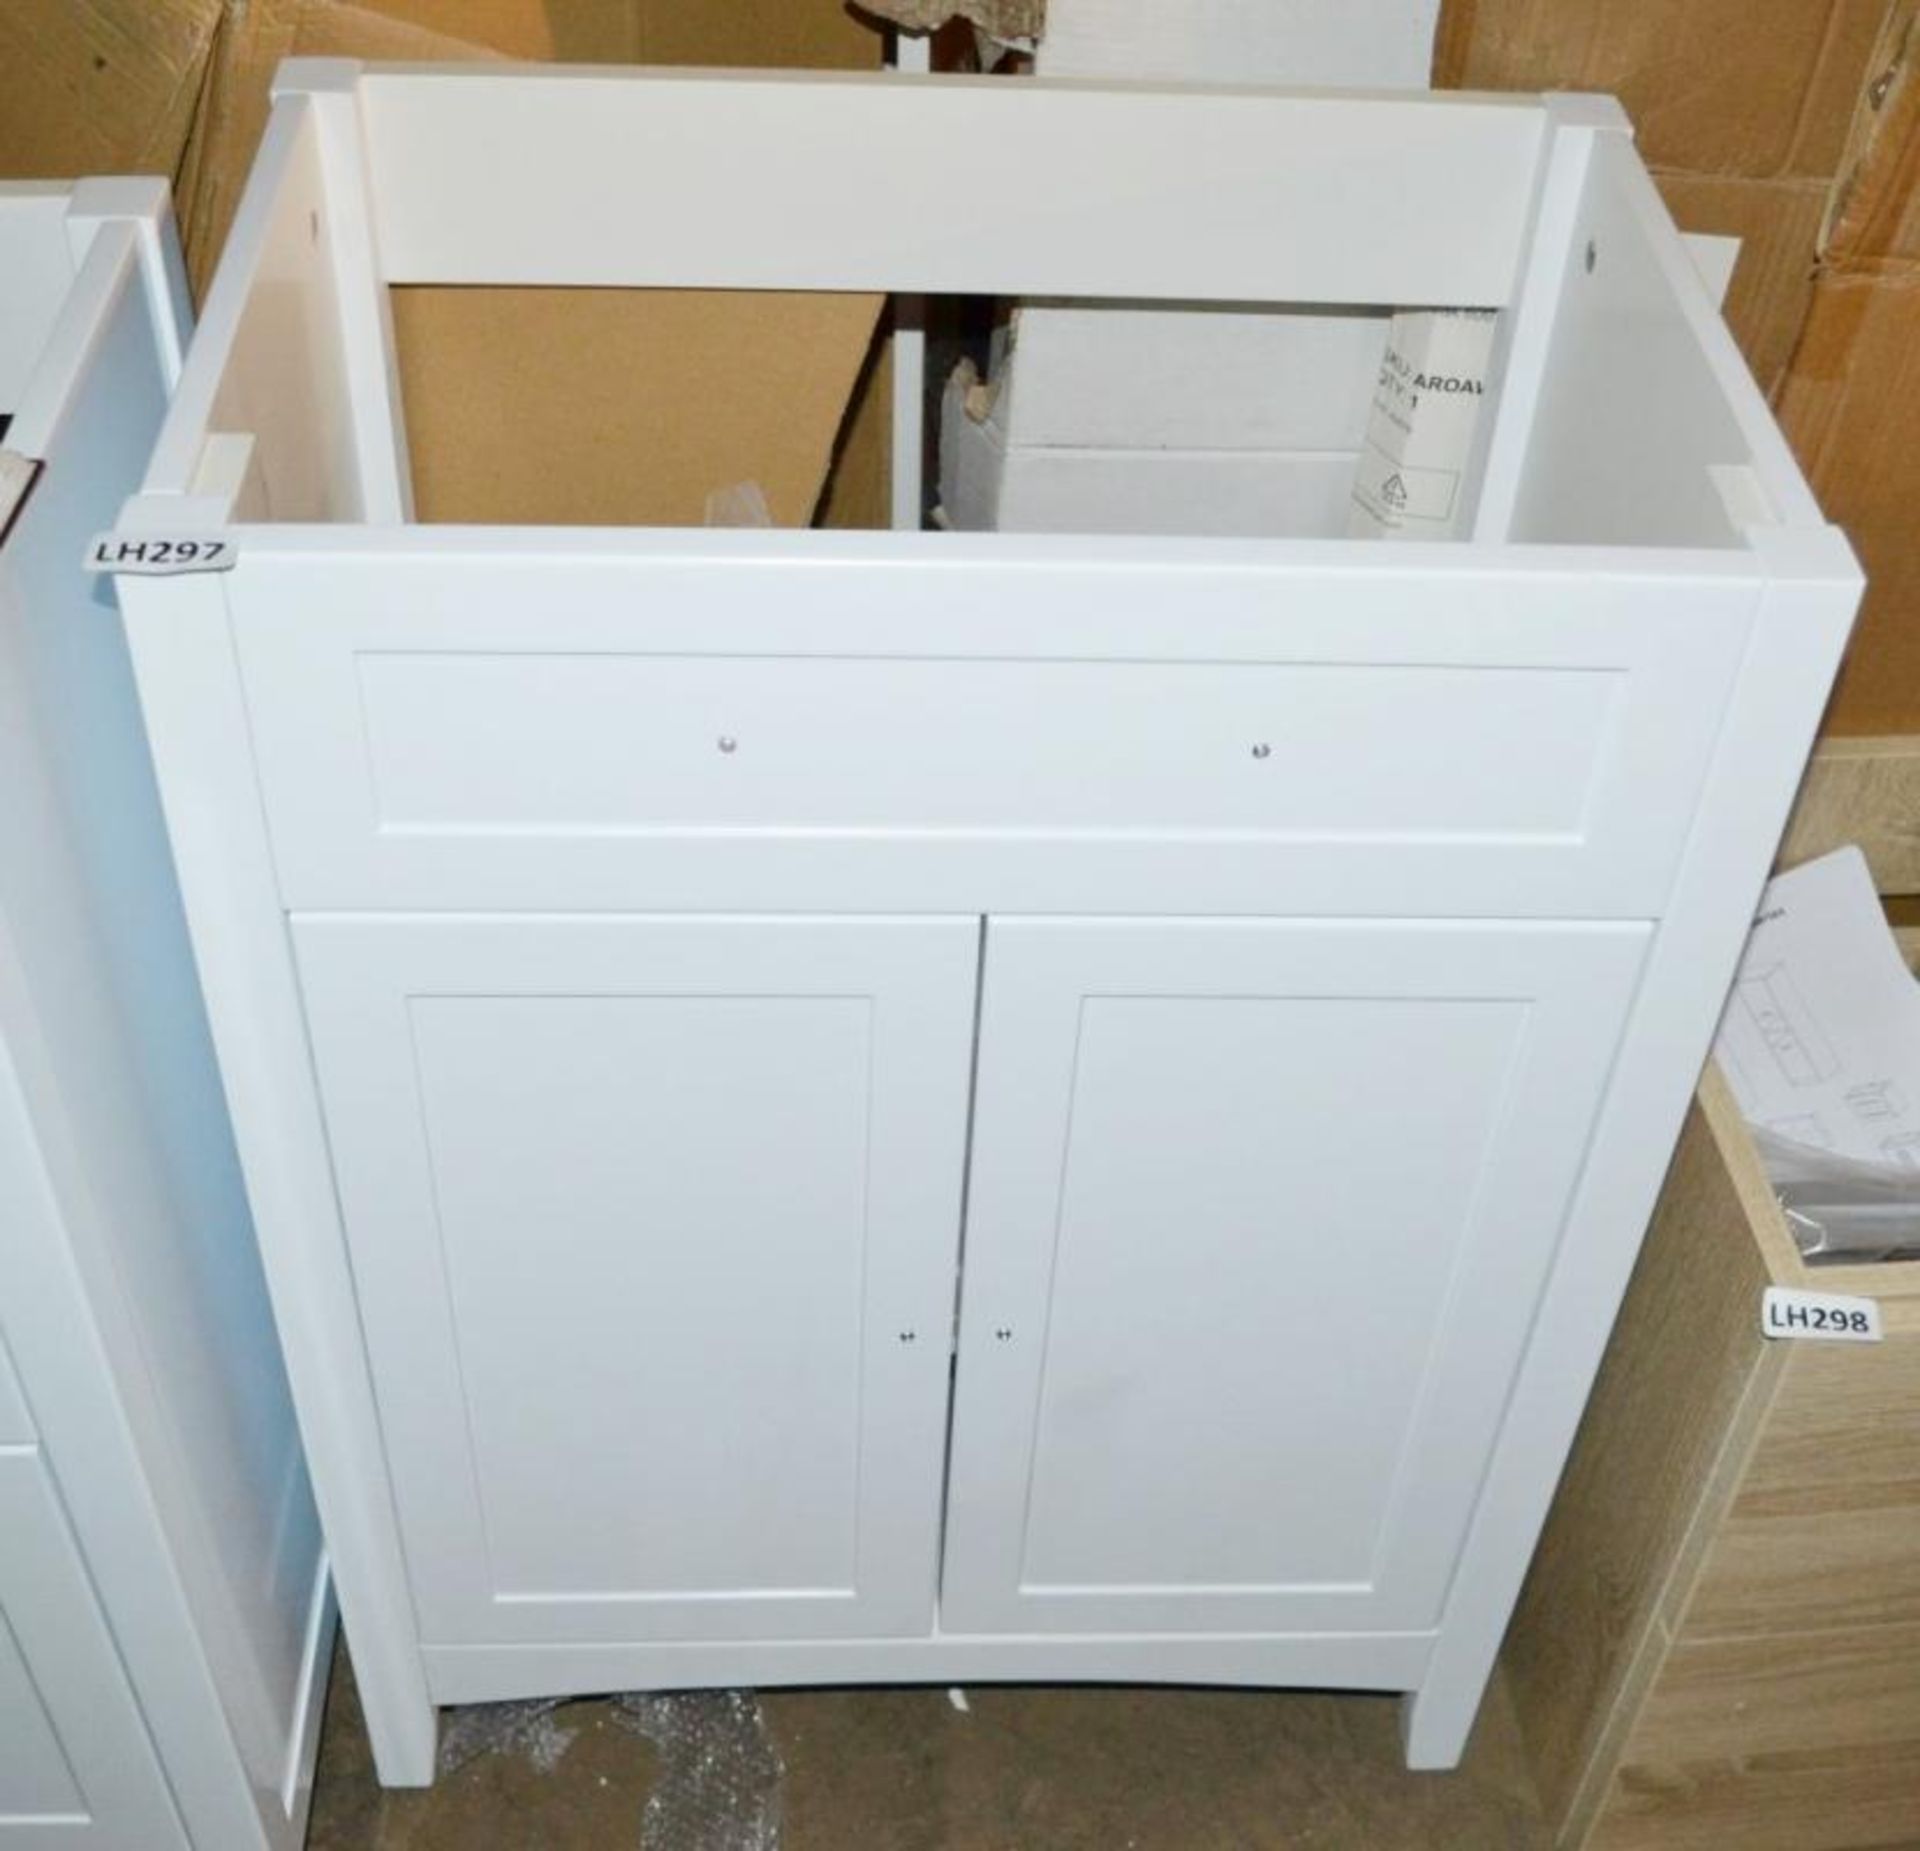 1 x Camberley 600 2-Drawer Soft Close Vanity Unit In White - New / Unused Stock - Dimensions: W60 x - Image 2 of 6